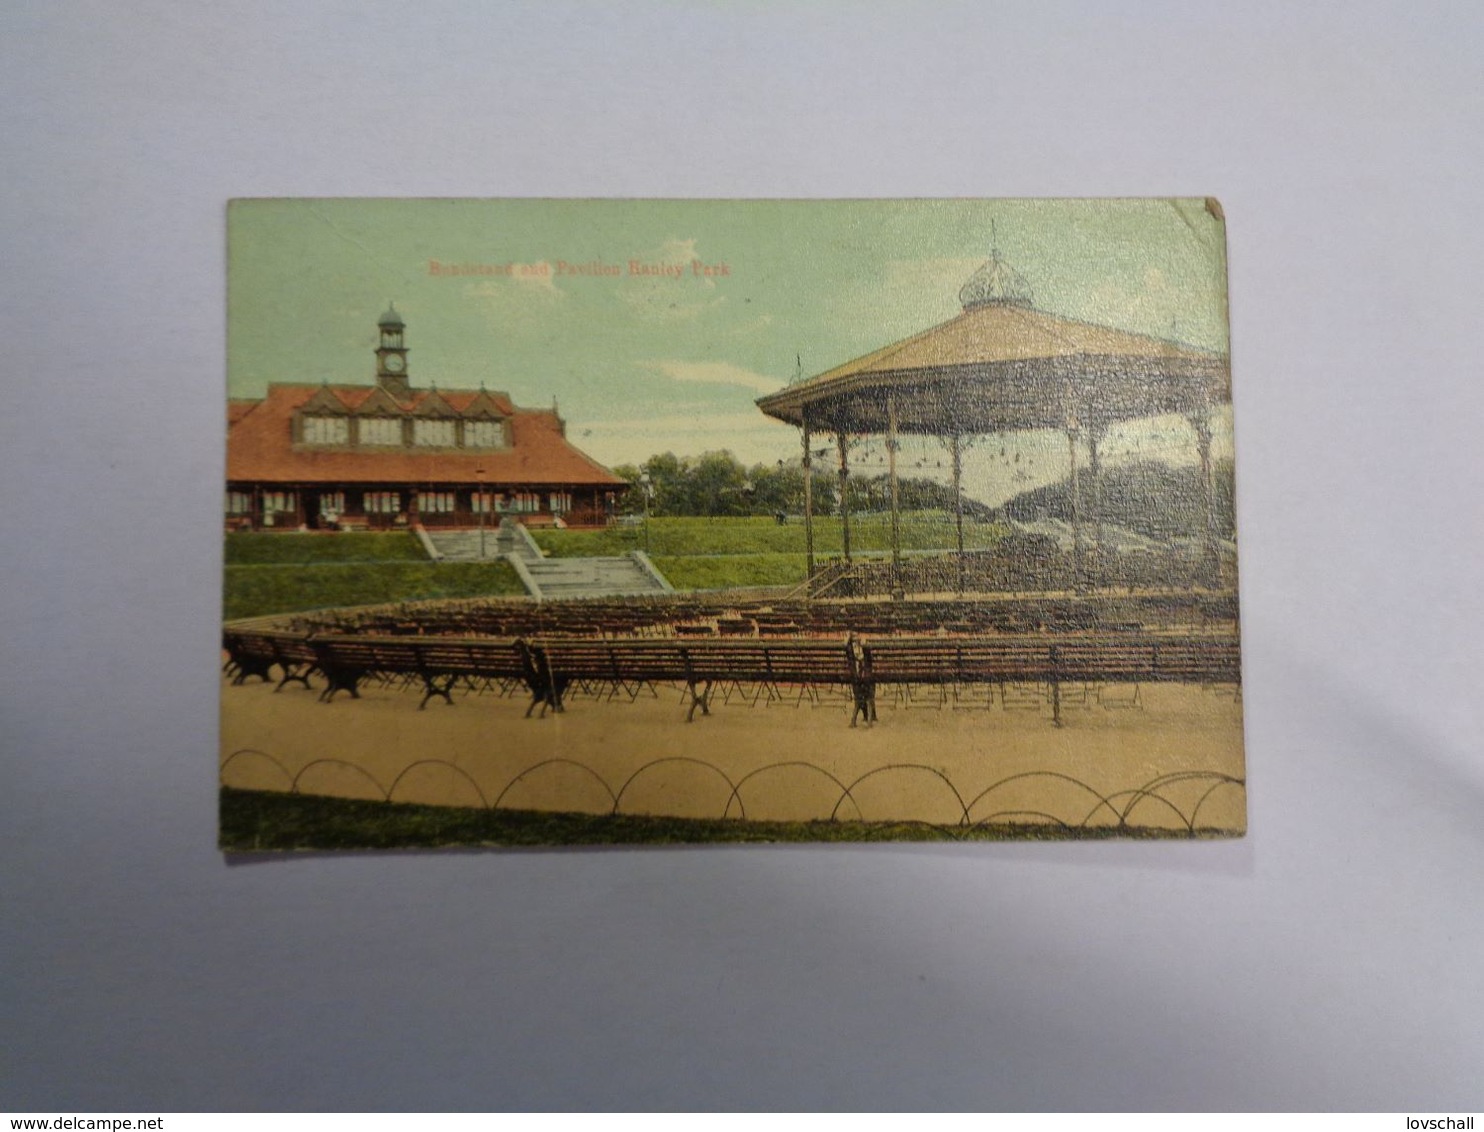 Stoke-on-Trent. - Bandstand And Pavilion Handley Park. (1922) - Stoke-on-Trent